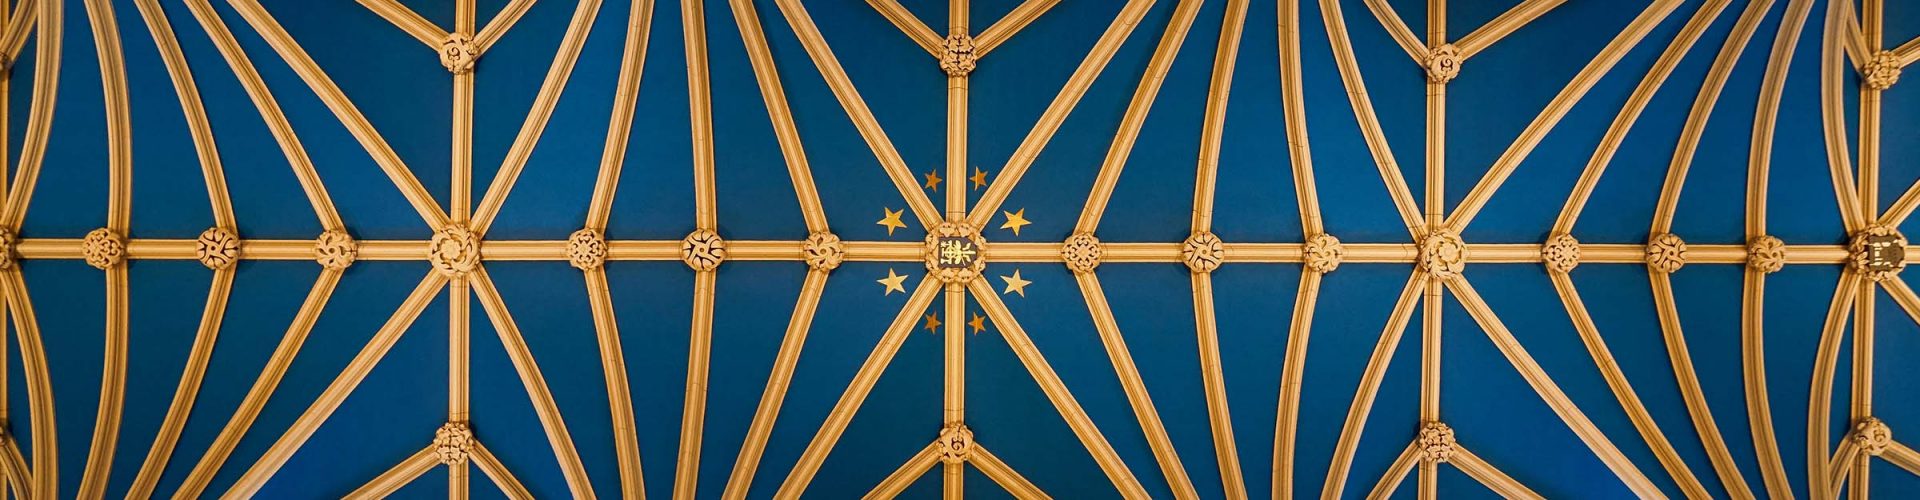 Blue and gold ceiling detail in St Giles' Cathedral Edinburgh